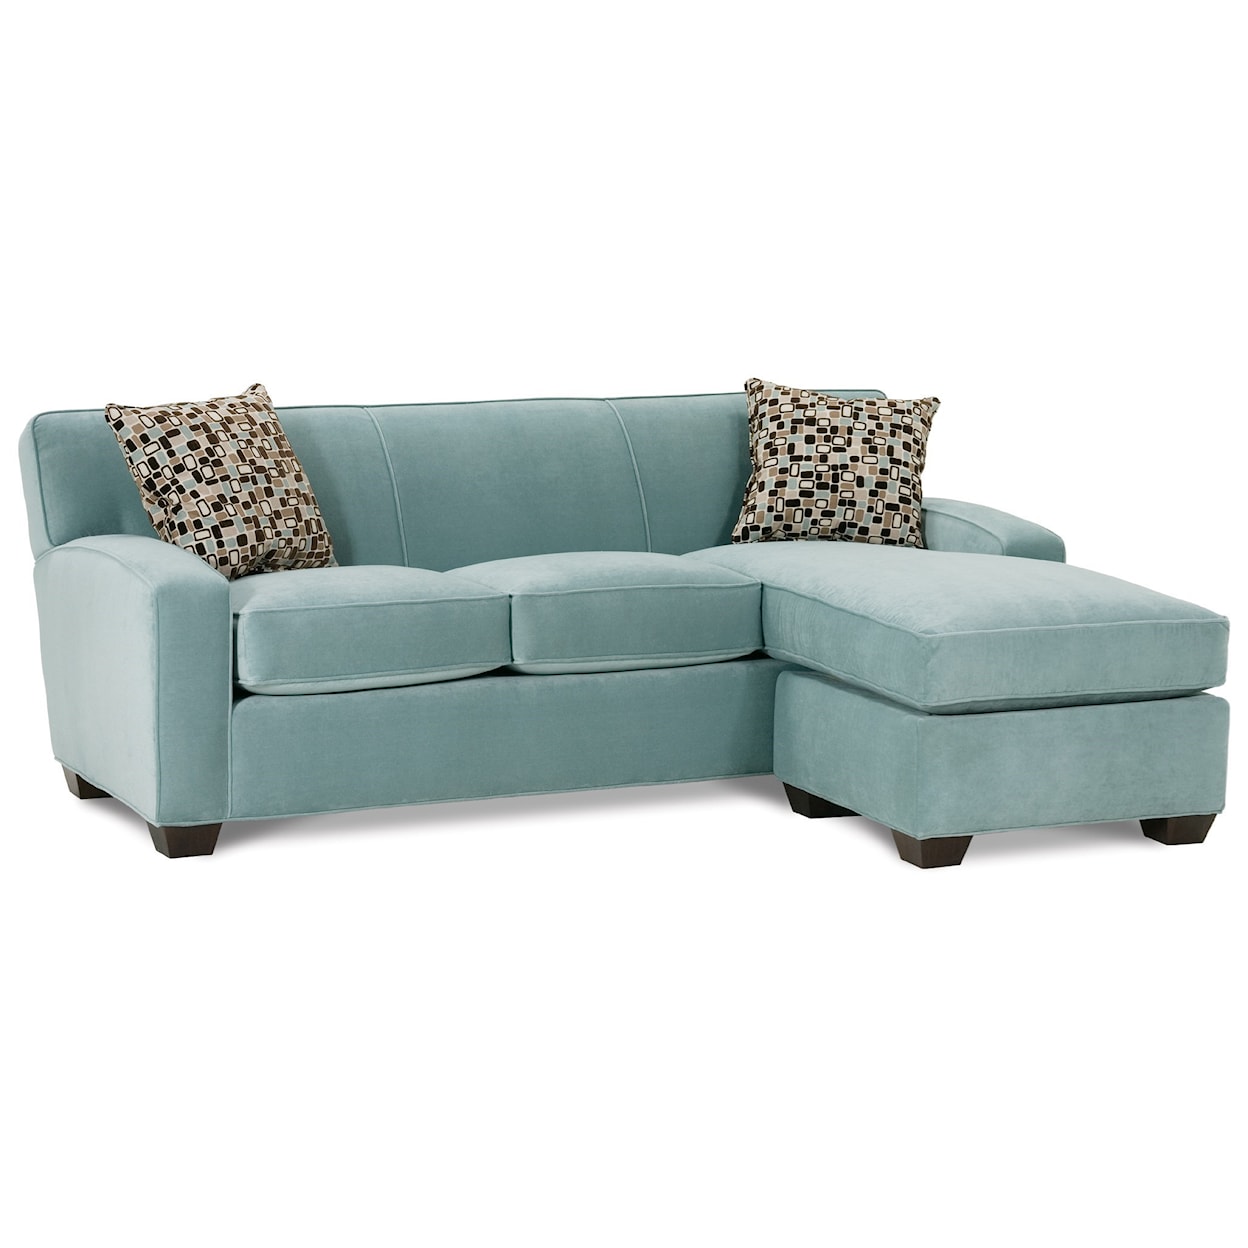 Rowe Horizon Transitional Sofa and Chaise